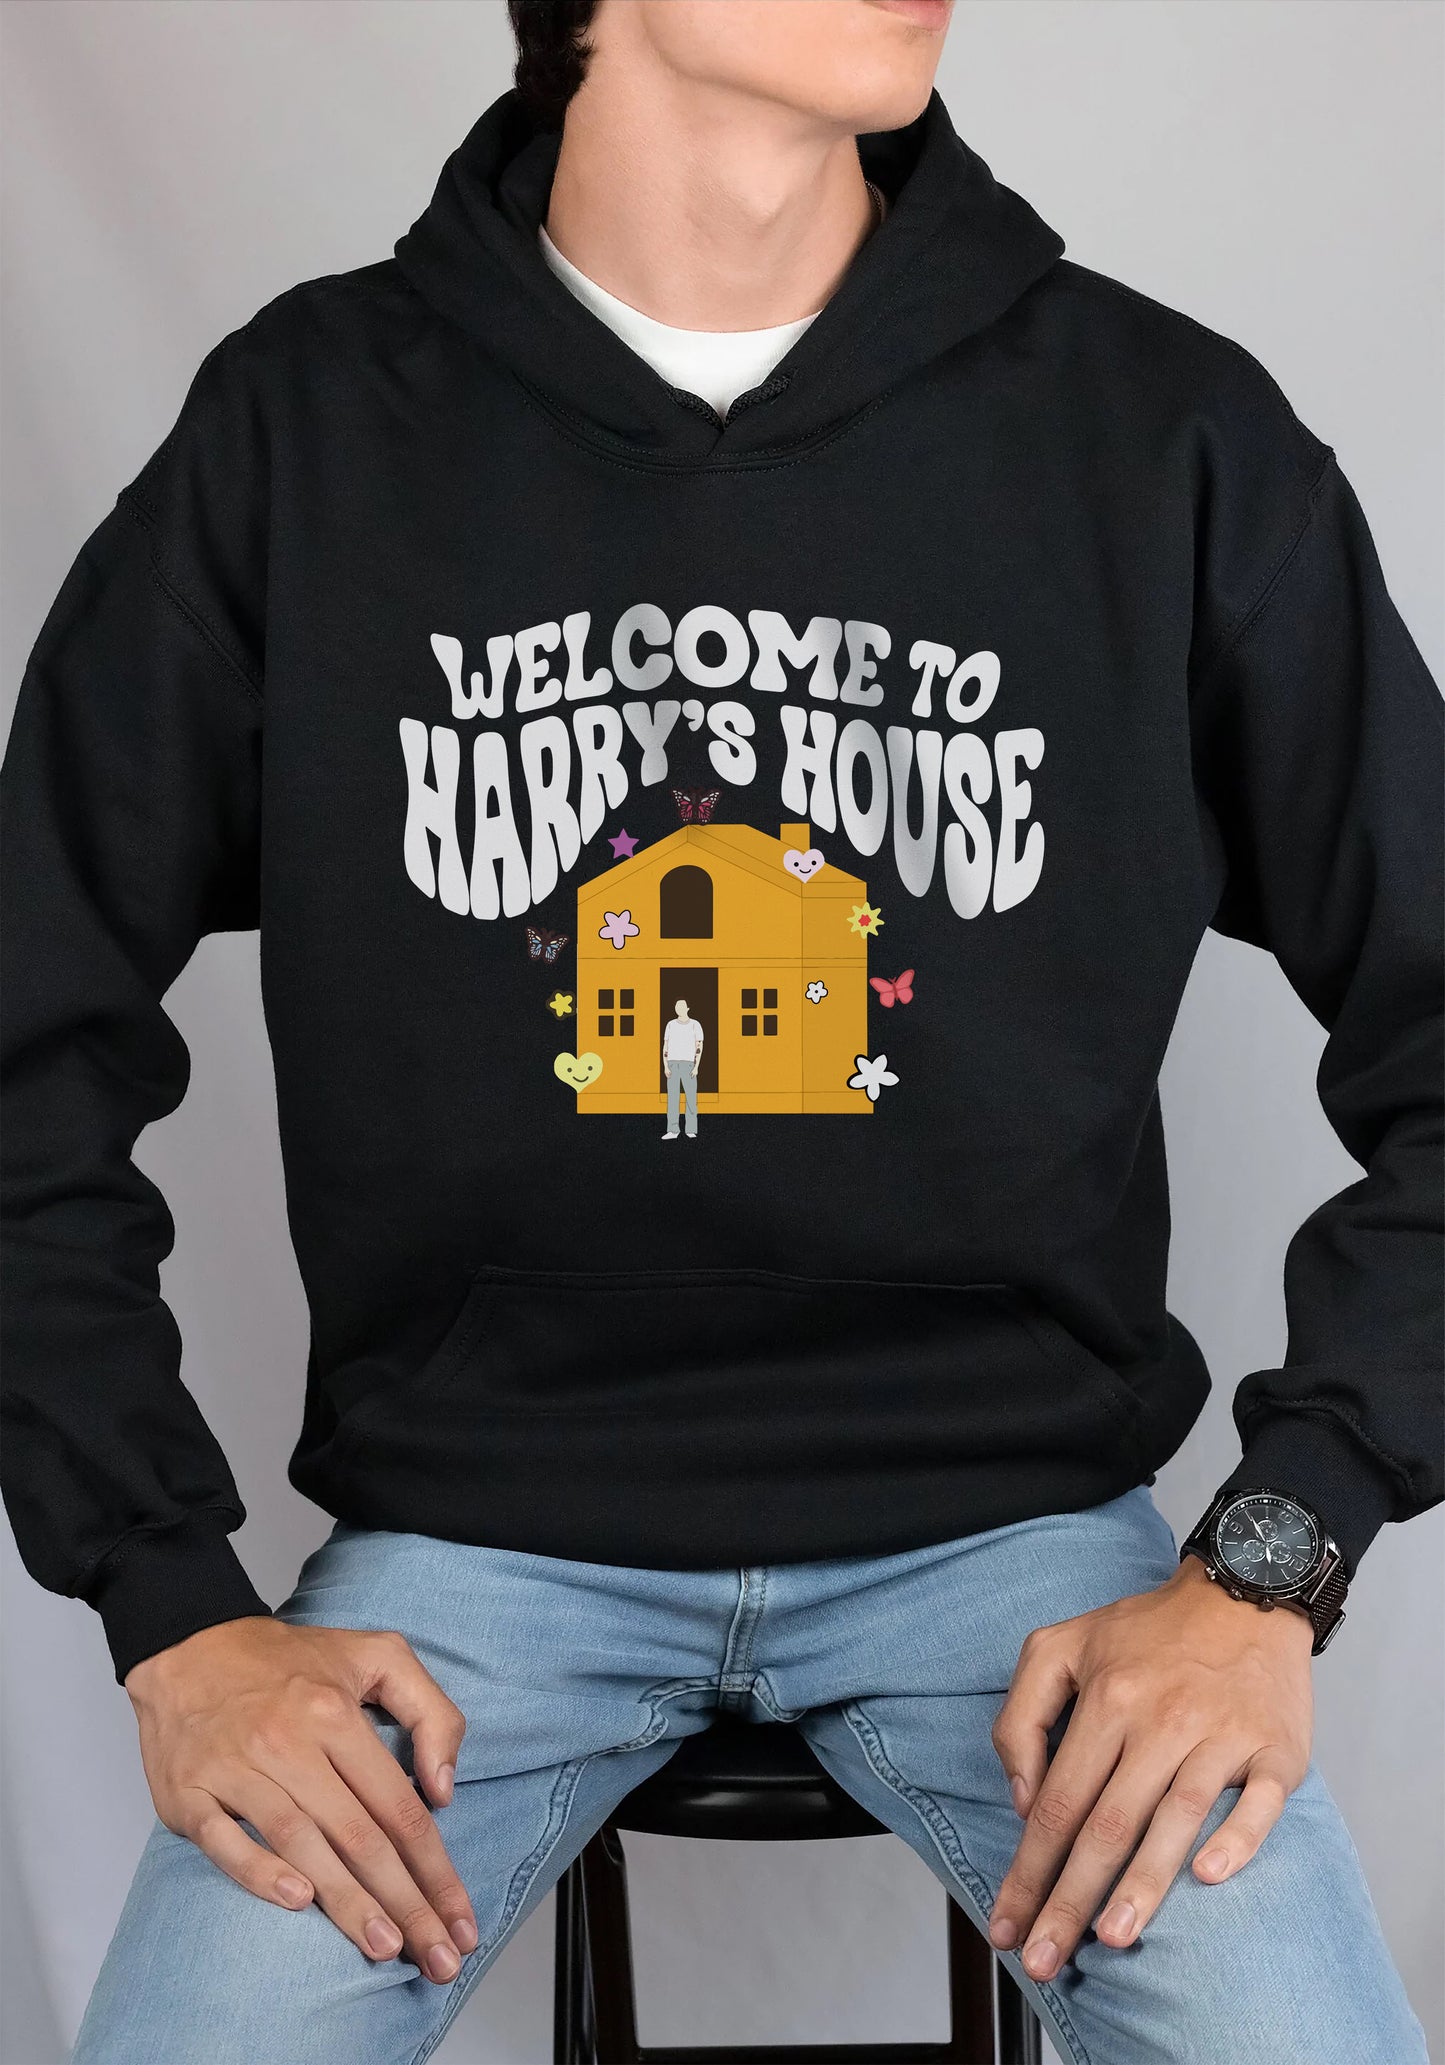 "Welcome to Harry's House" Sweatshirt (Crewneck/Hoodie) - pear with me